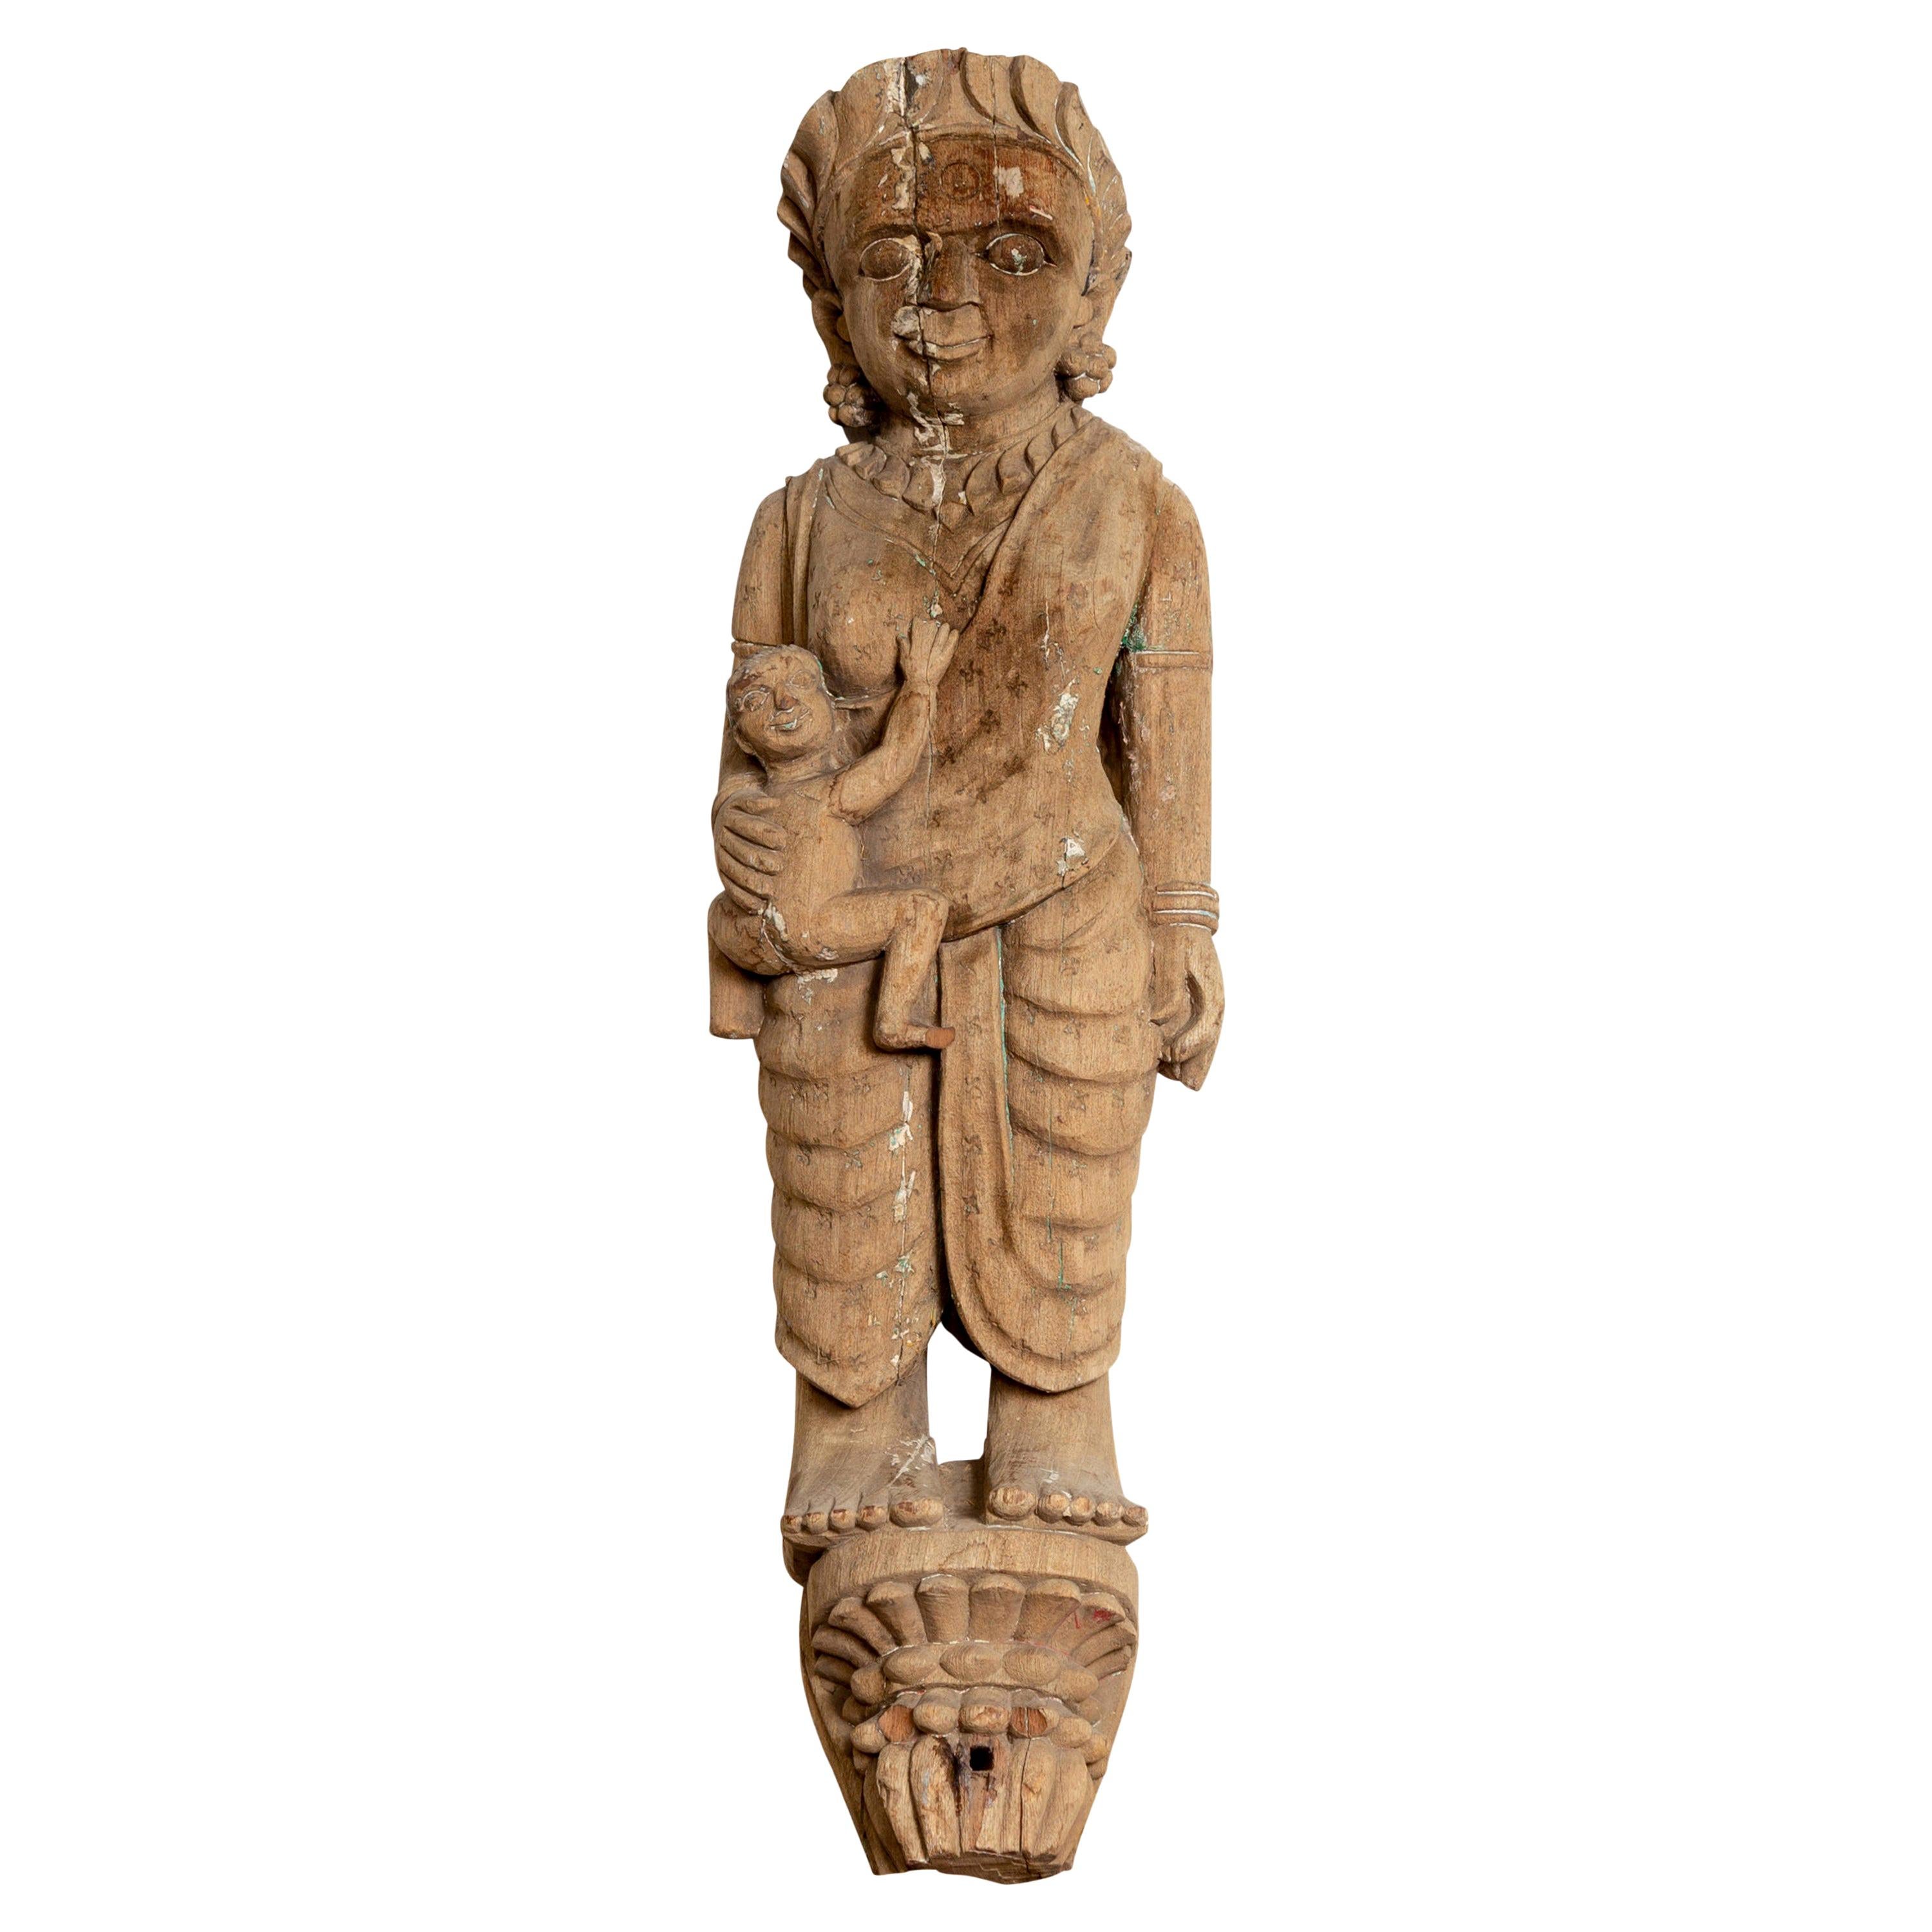 Hand Carved Indian Temple Carving Statue from Gujarat Depicting Mother and Child